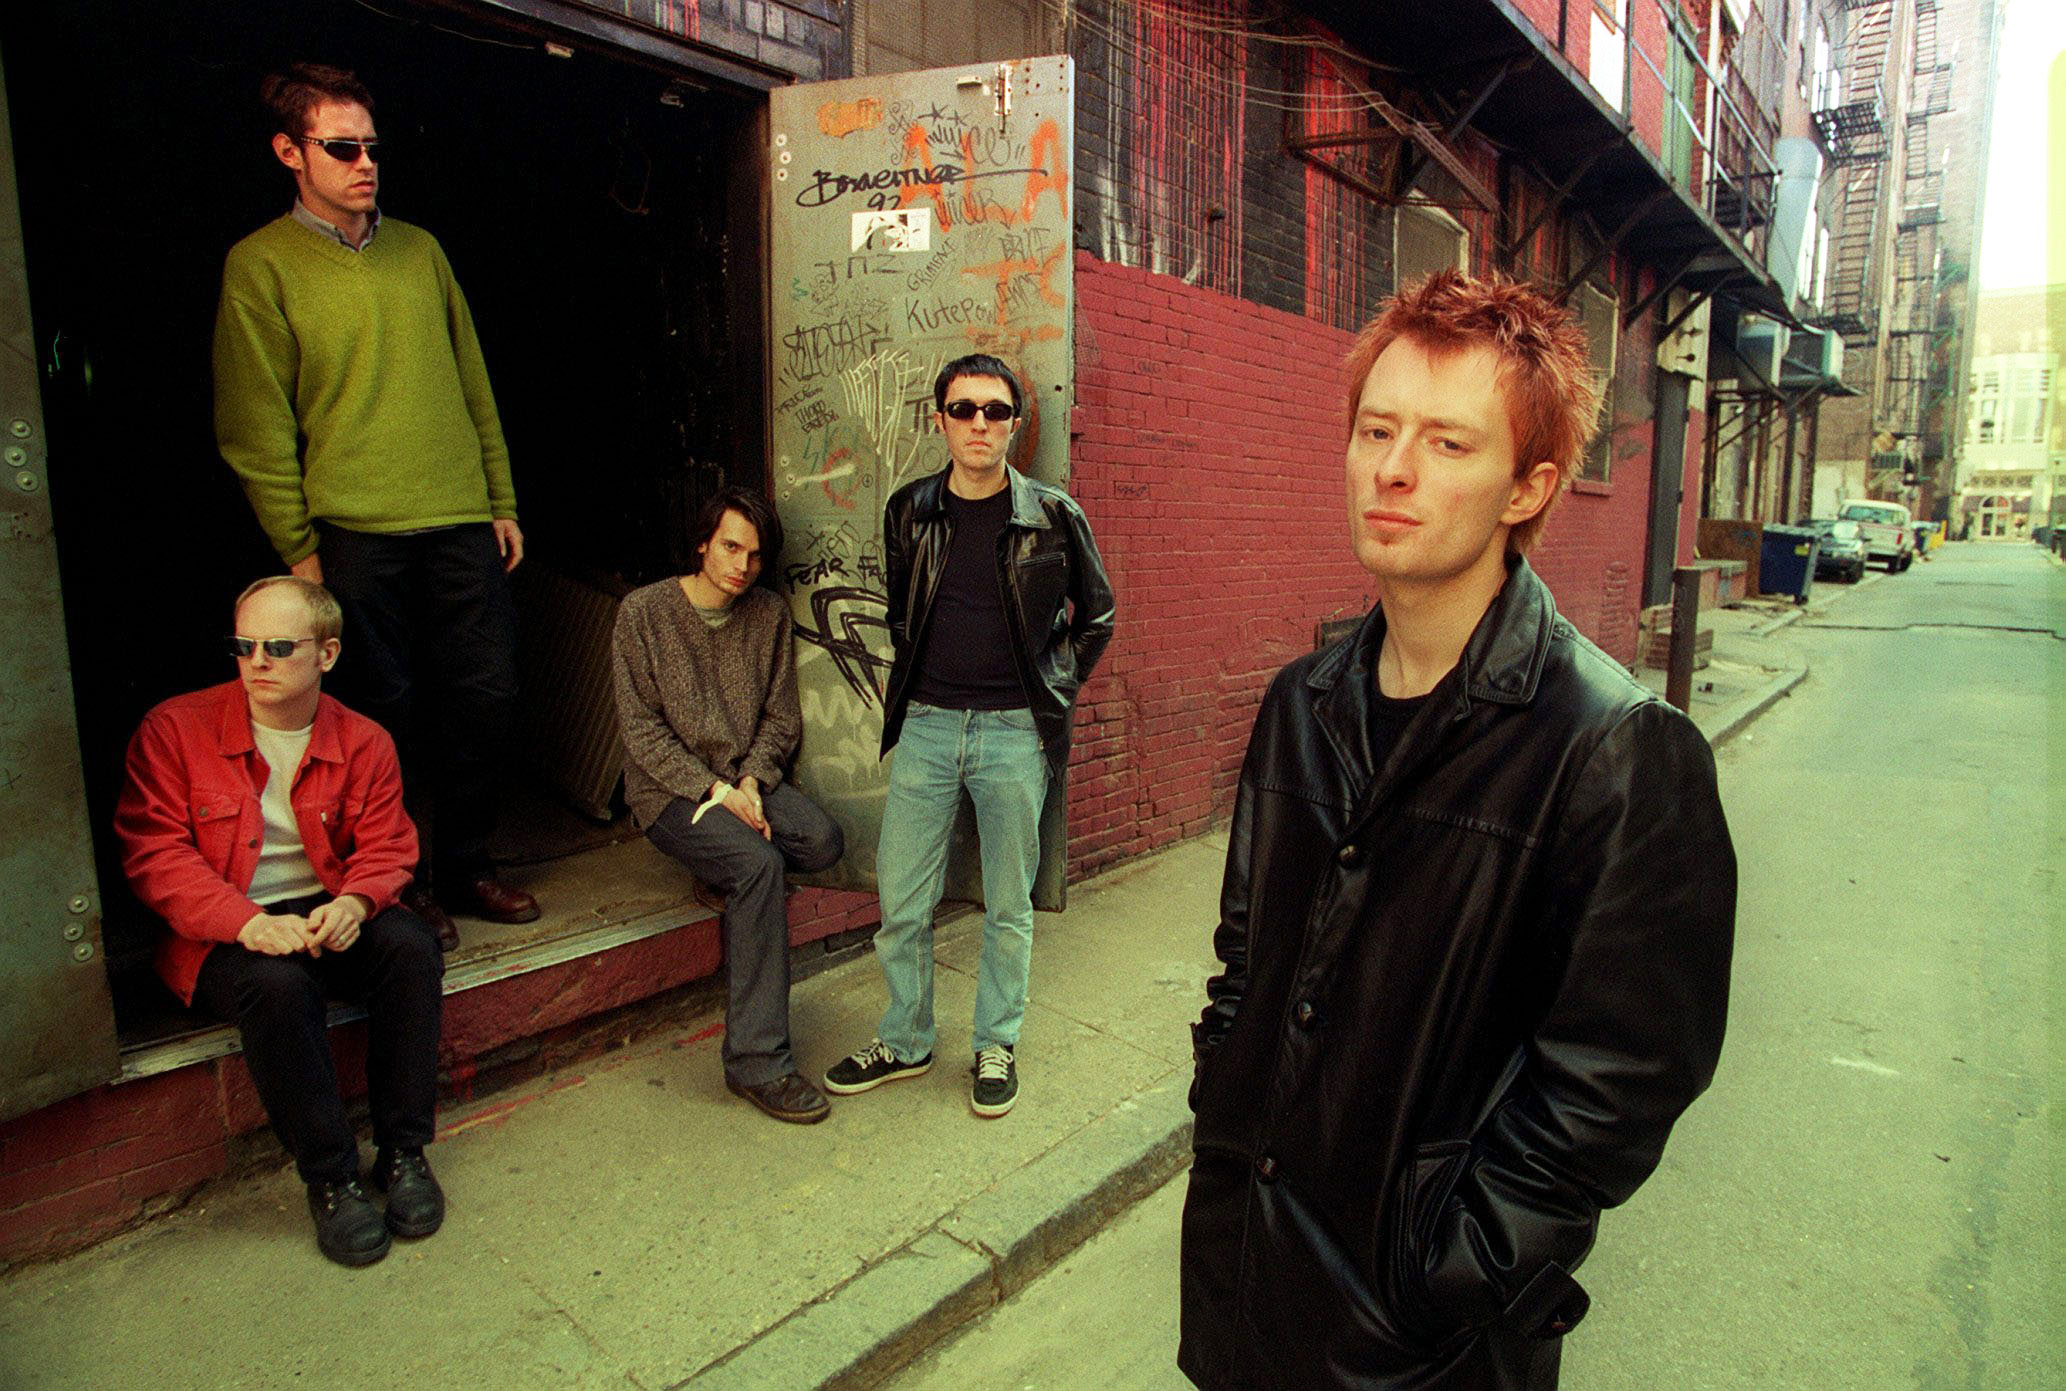 Sorry, But If You Weren’t a ’90s Kid You’re Going to Fail This Music Trivia Quiz Radiohead pop group to play at T in the Park standing doorway back alley lafrssmay05 2505